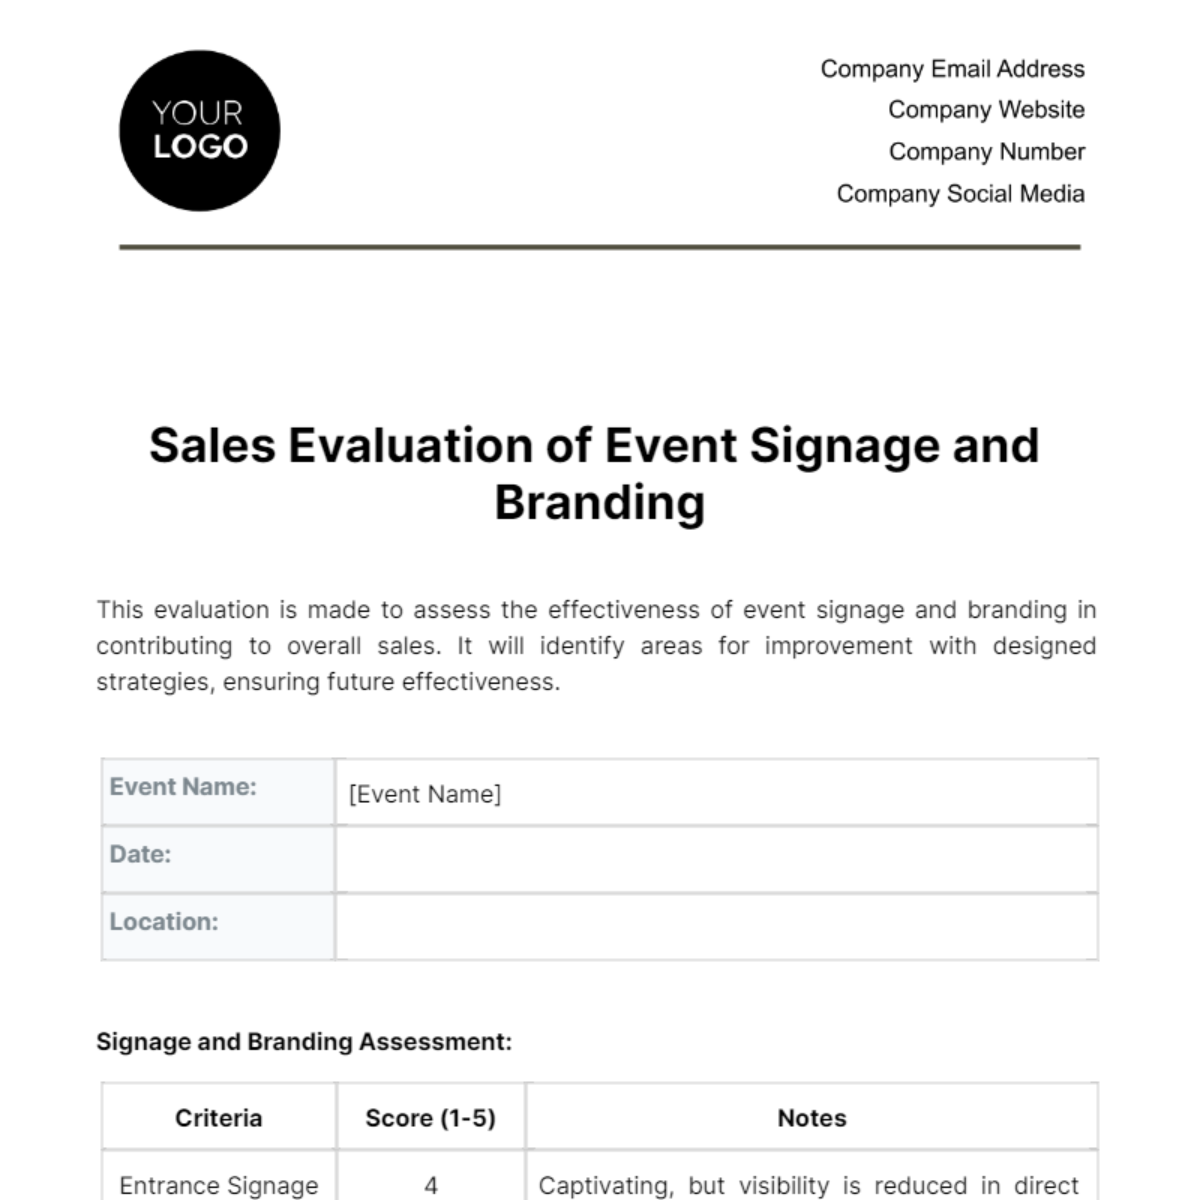 Sales Evaluation of Event Signage and Branding Template